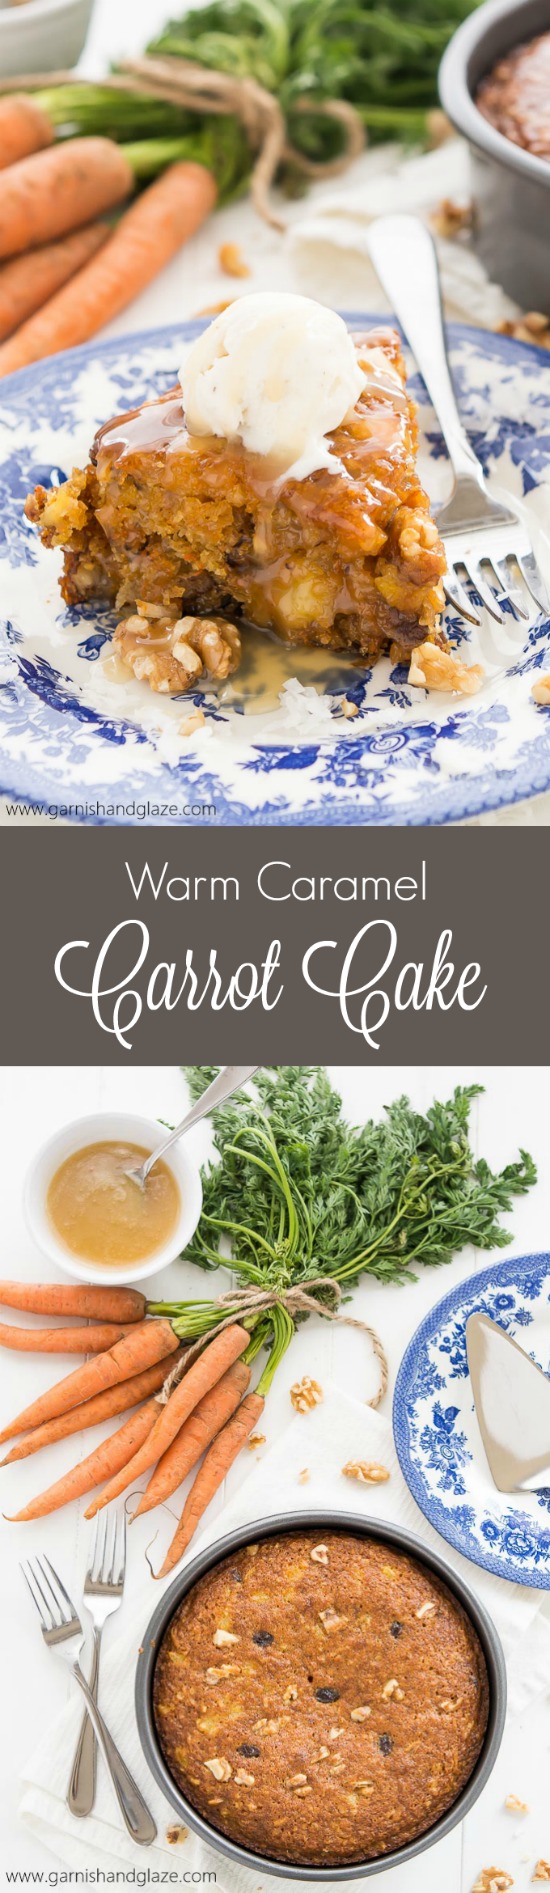 If you thought carrot cake with cream cheese frosting was good, wait until you try this delicious Warm Caramel Carrot Cake à la mode! It's mind-blowing!